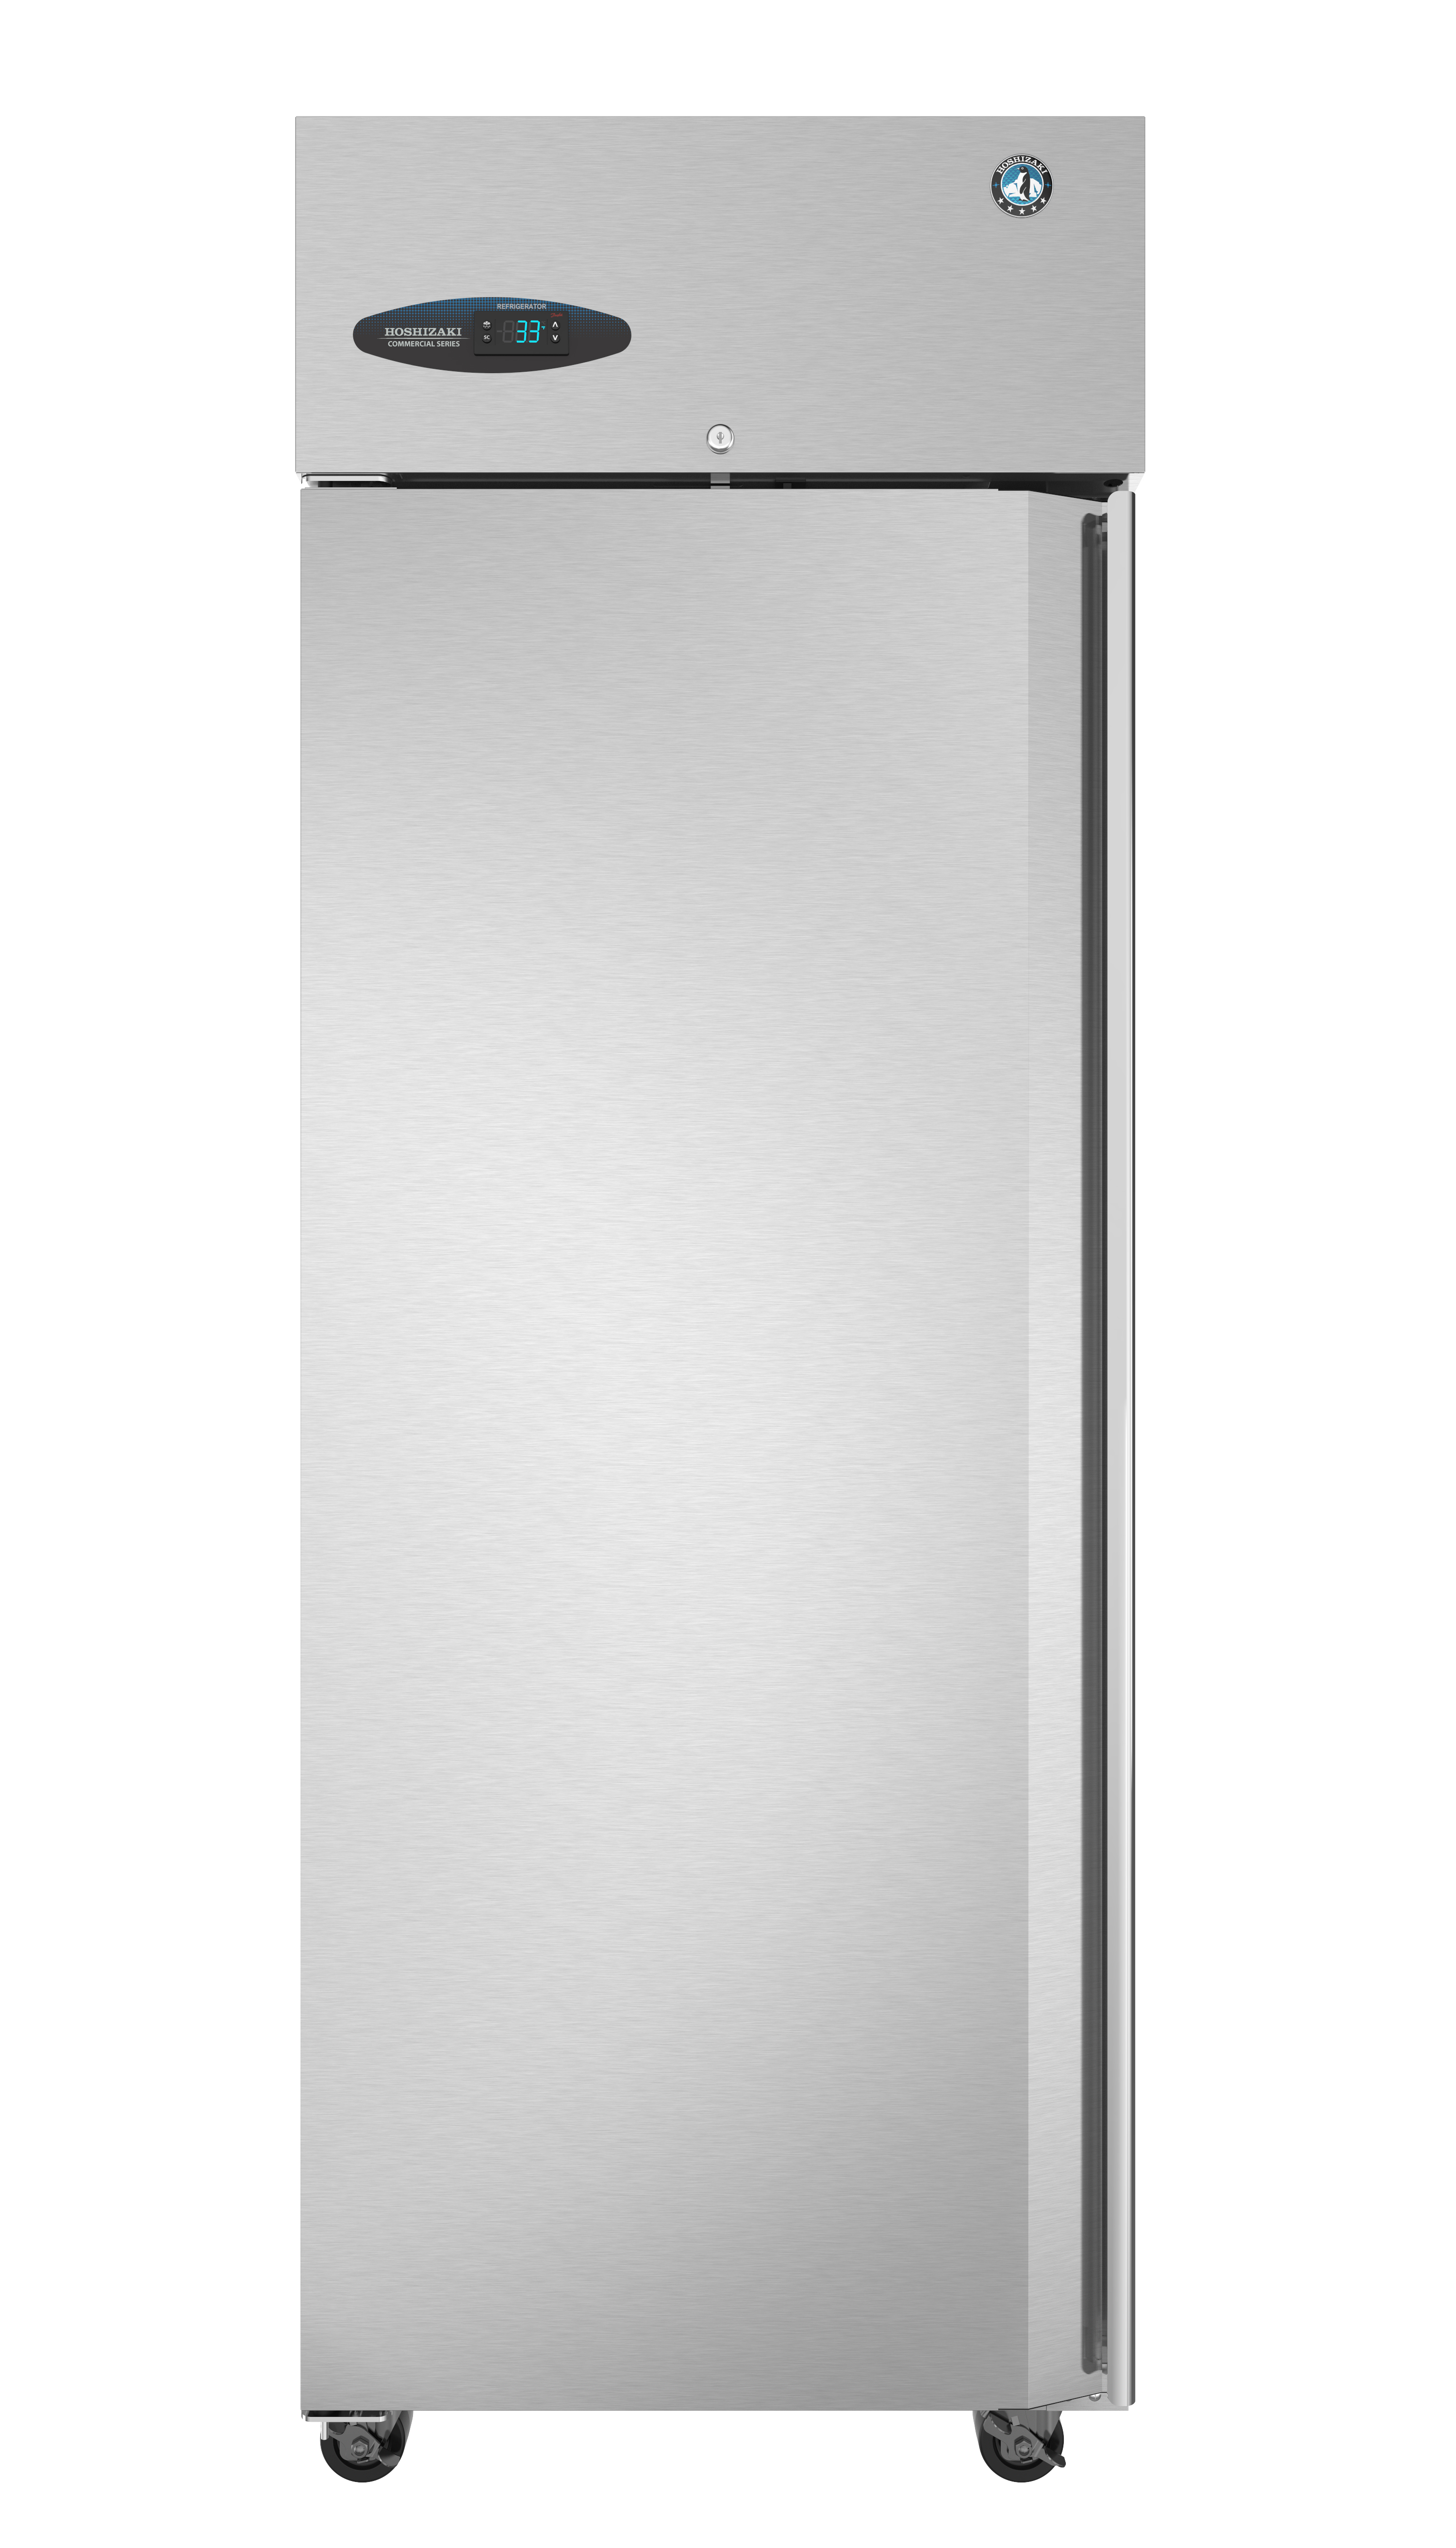 CR1S-FSL, Refrigerator, Single Section Upright, Full Stainless Door